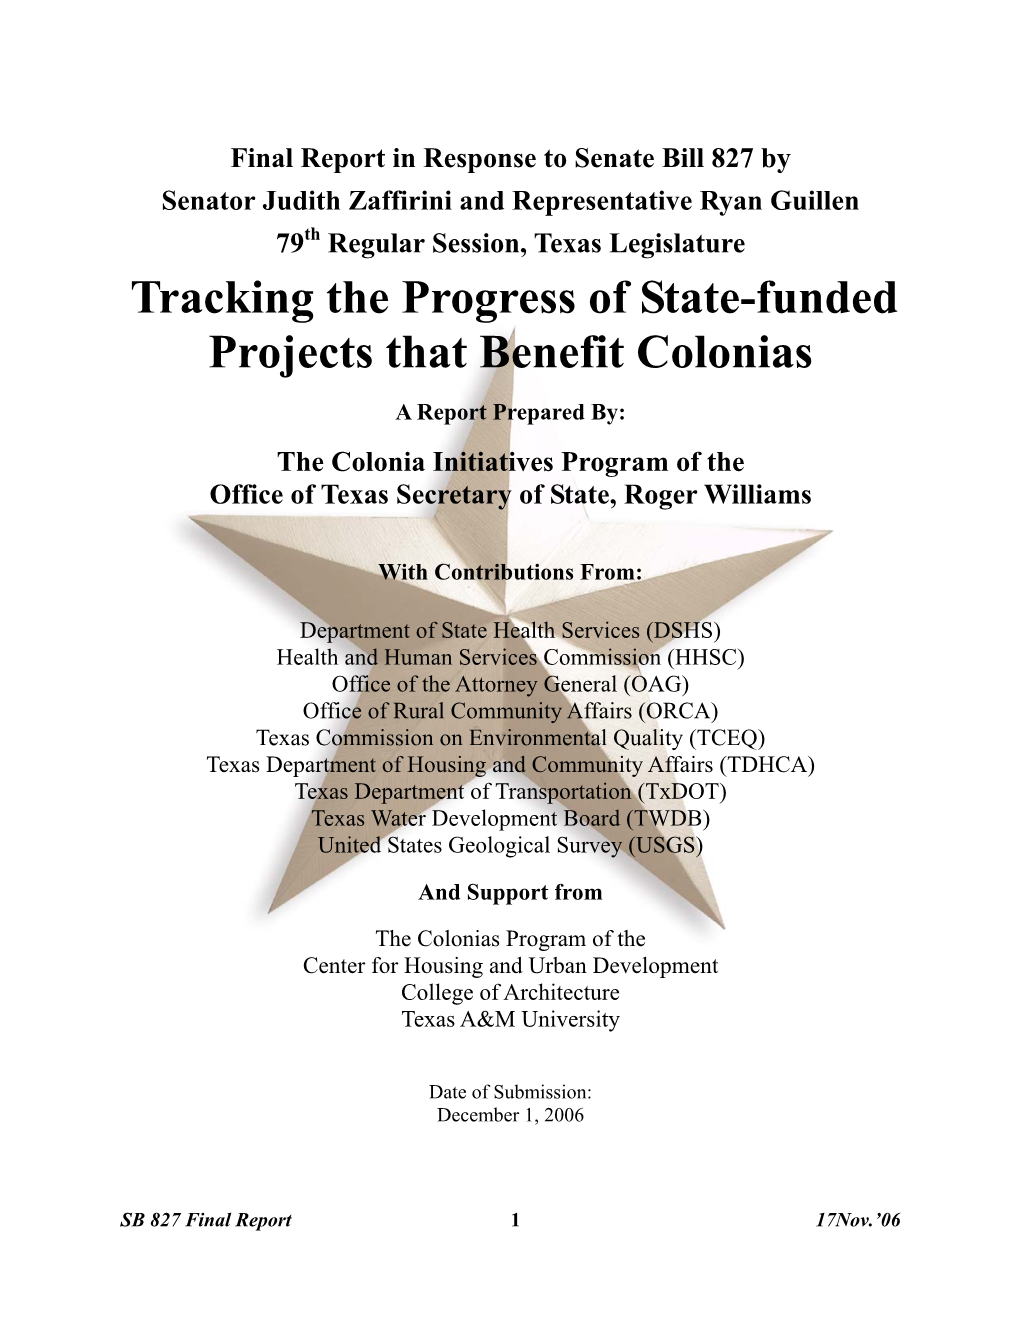 Tracking the Progress of State-Funded Projects That Benefit Colonias